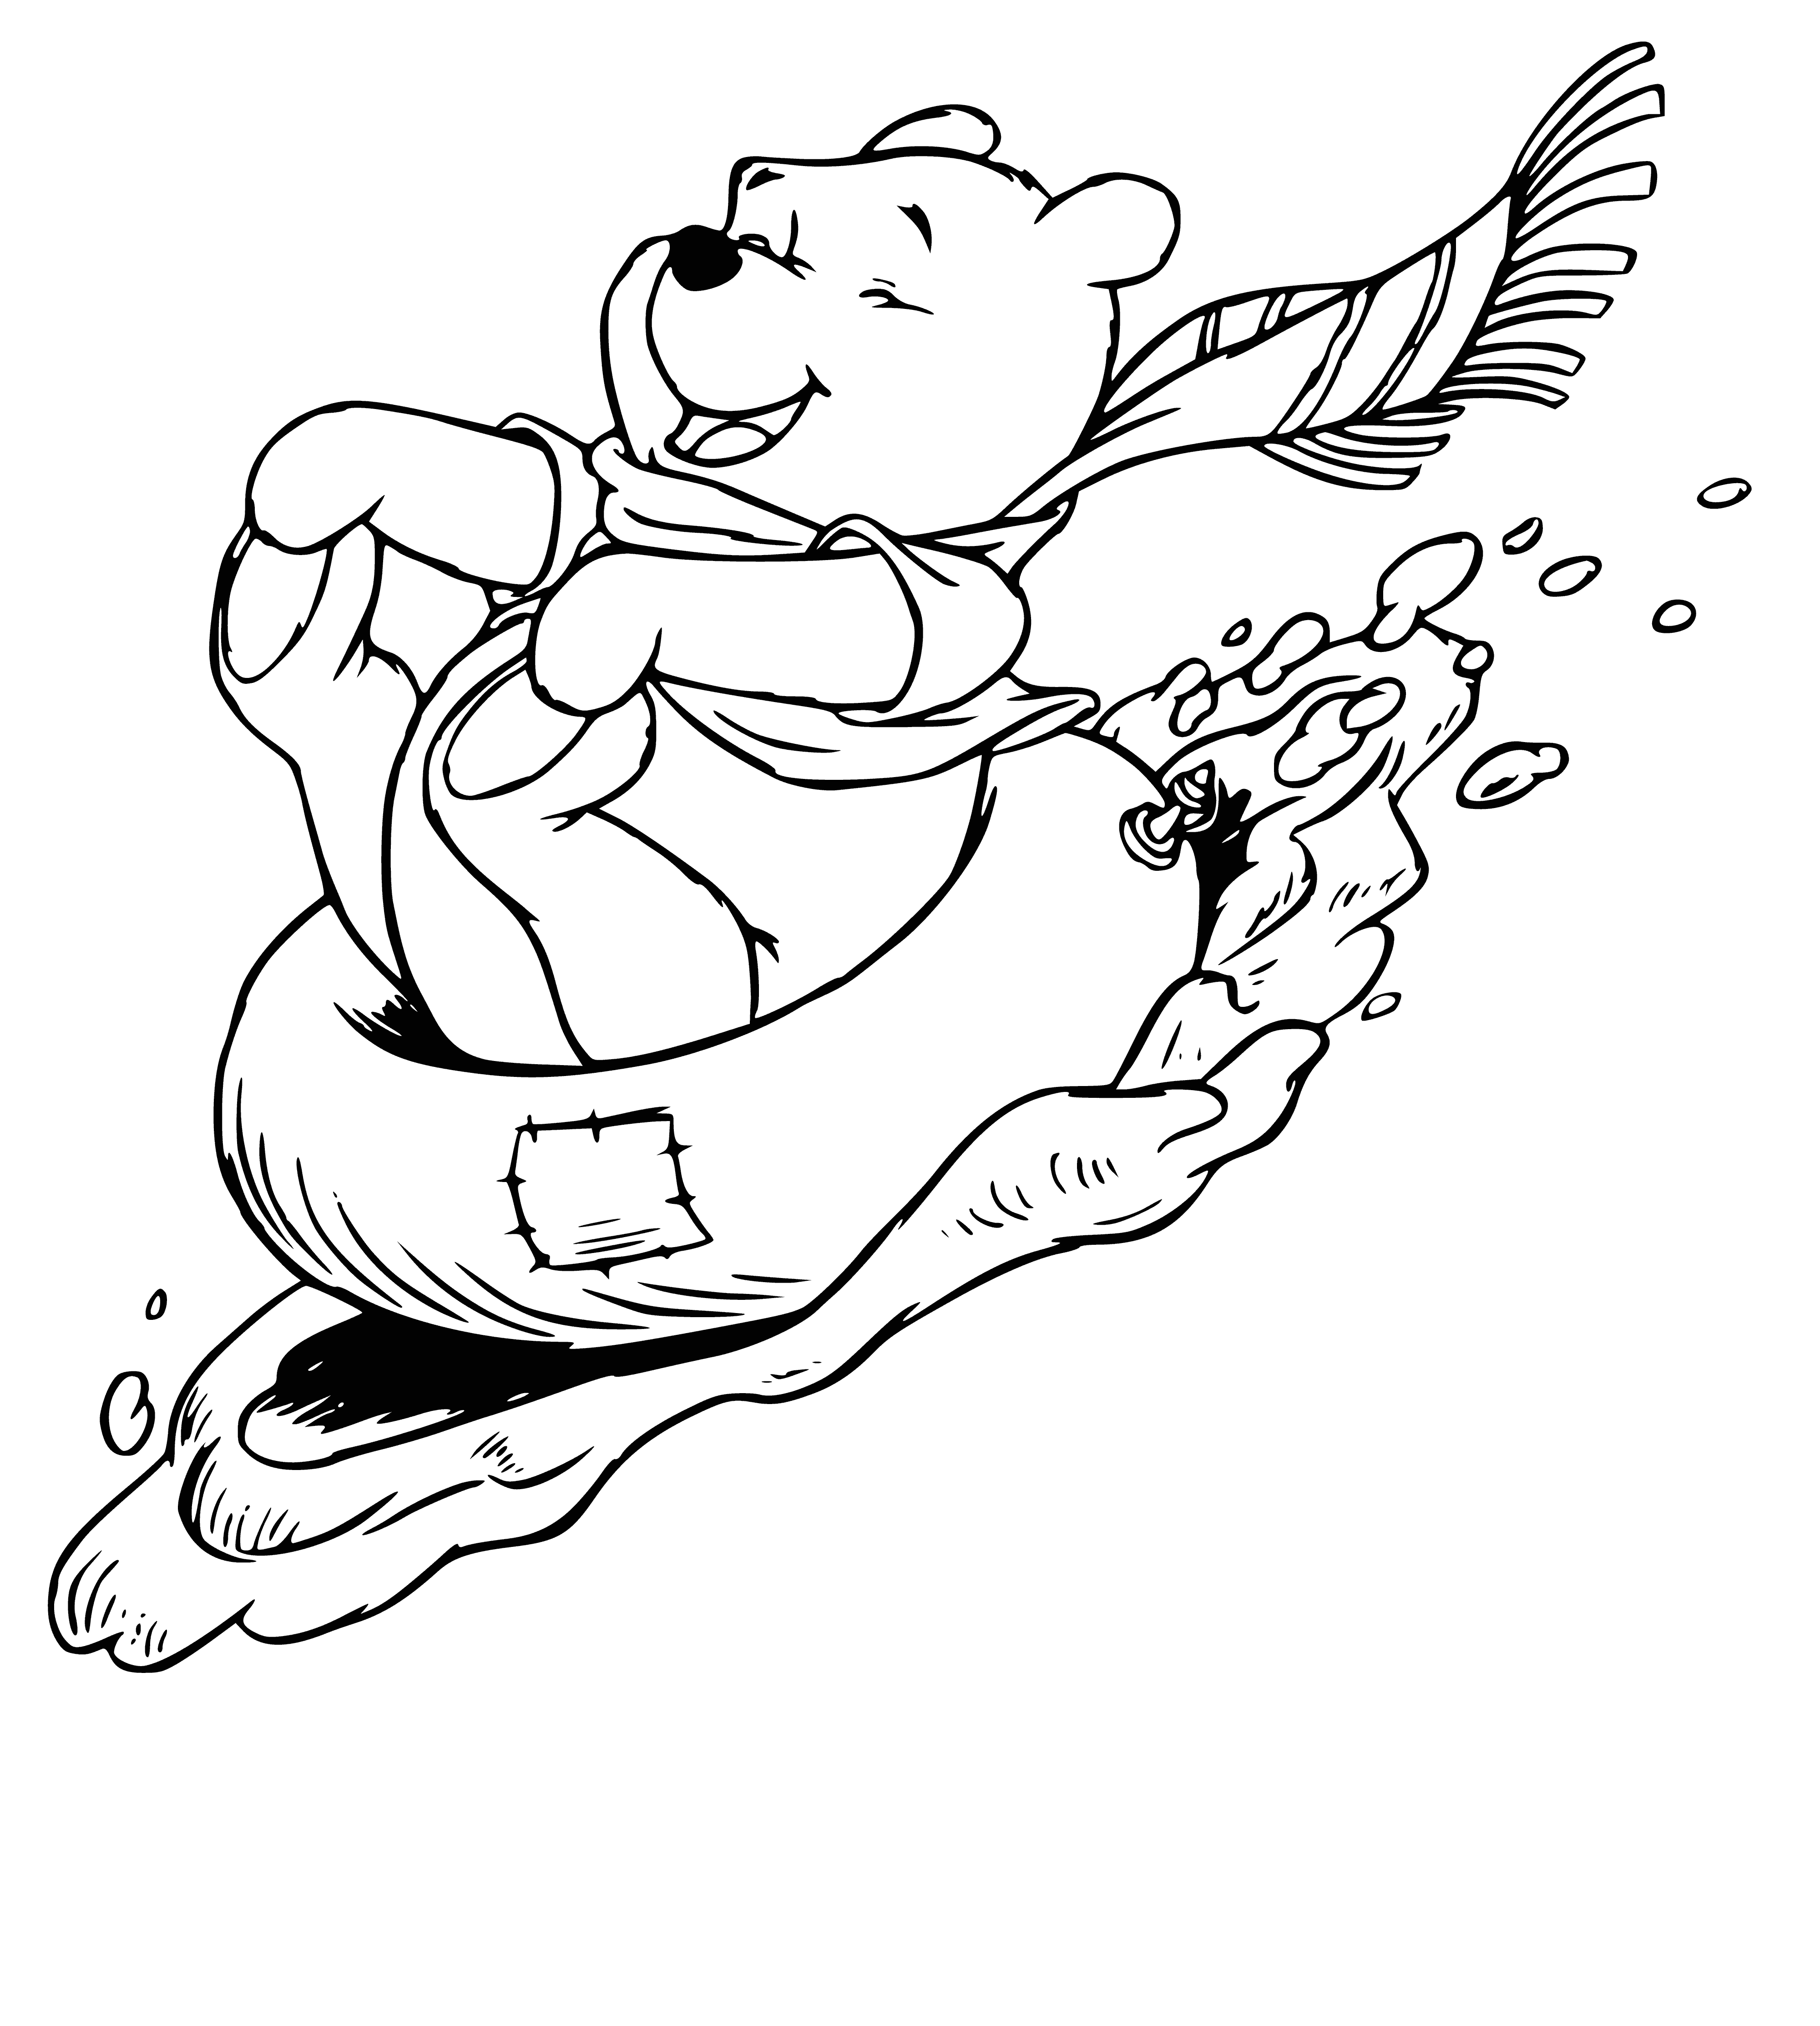 Winnie is rolling down the mountain coloring page